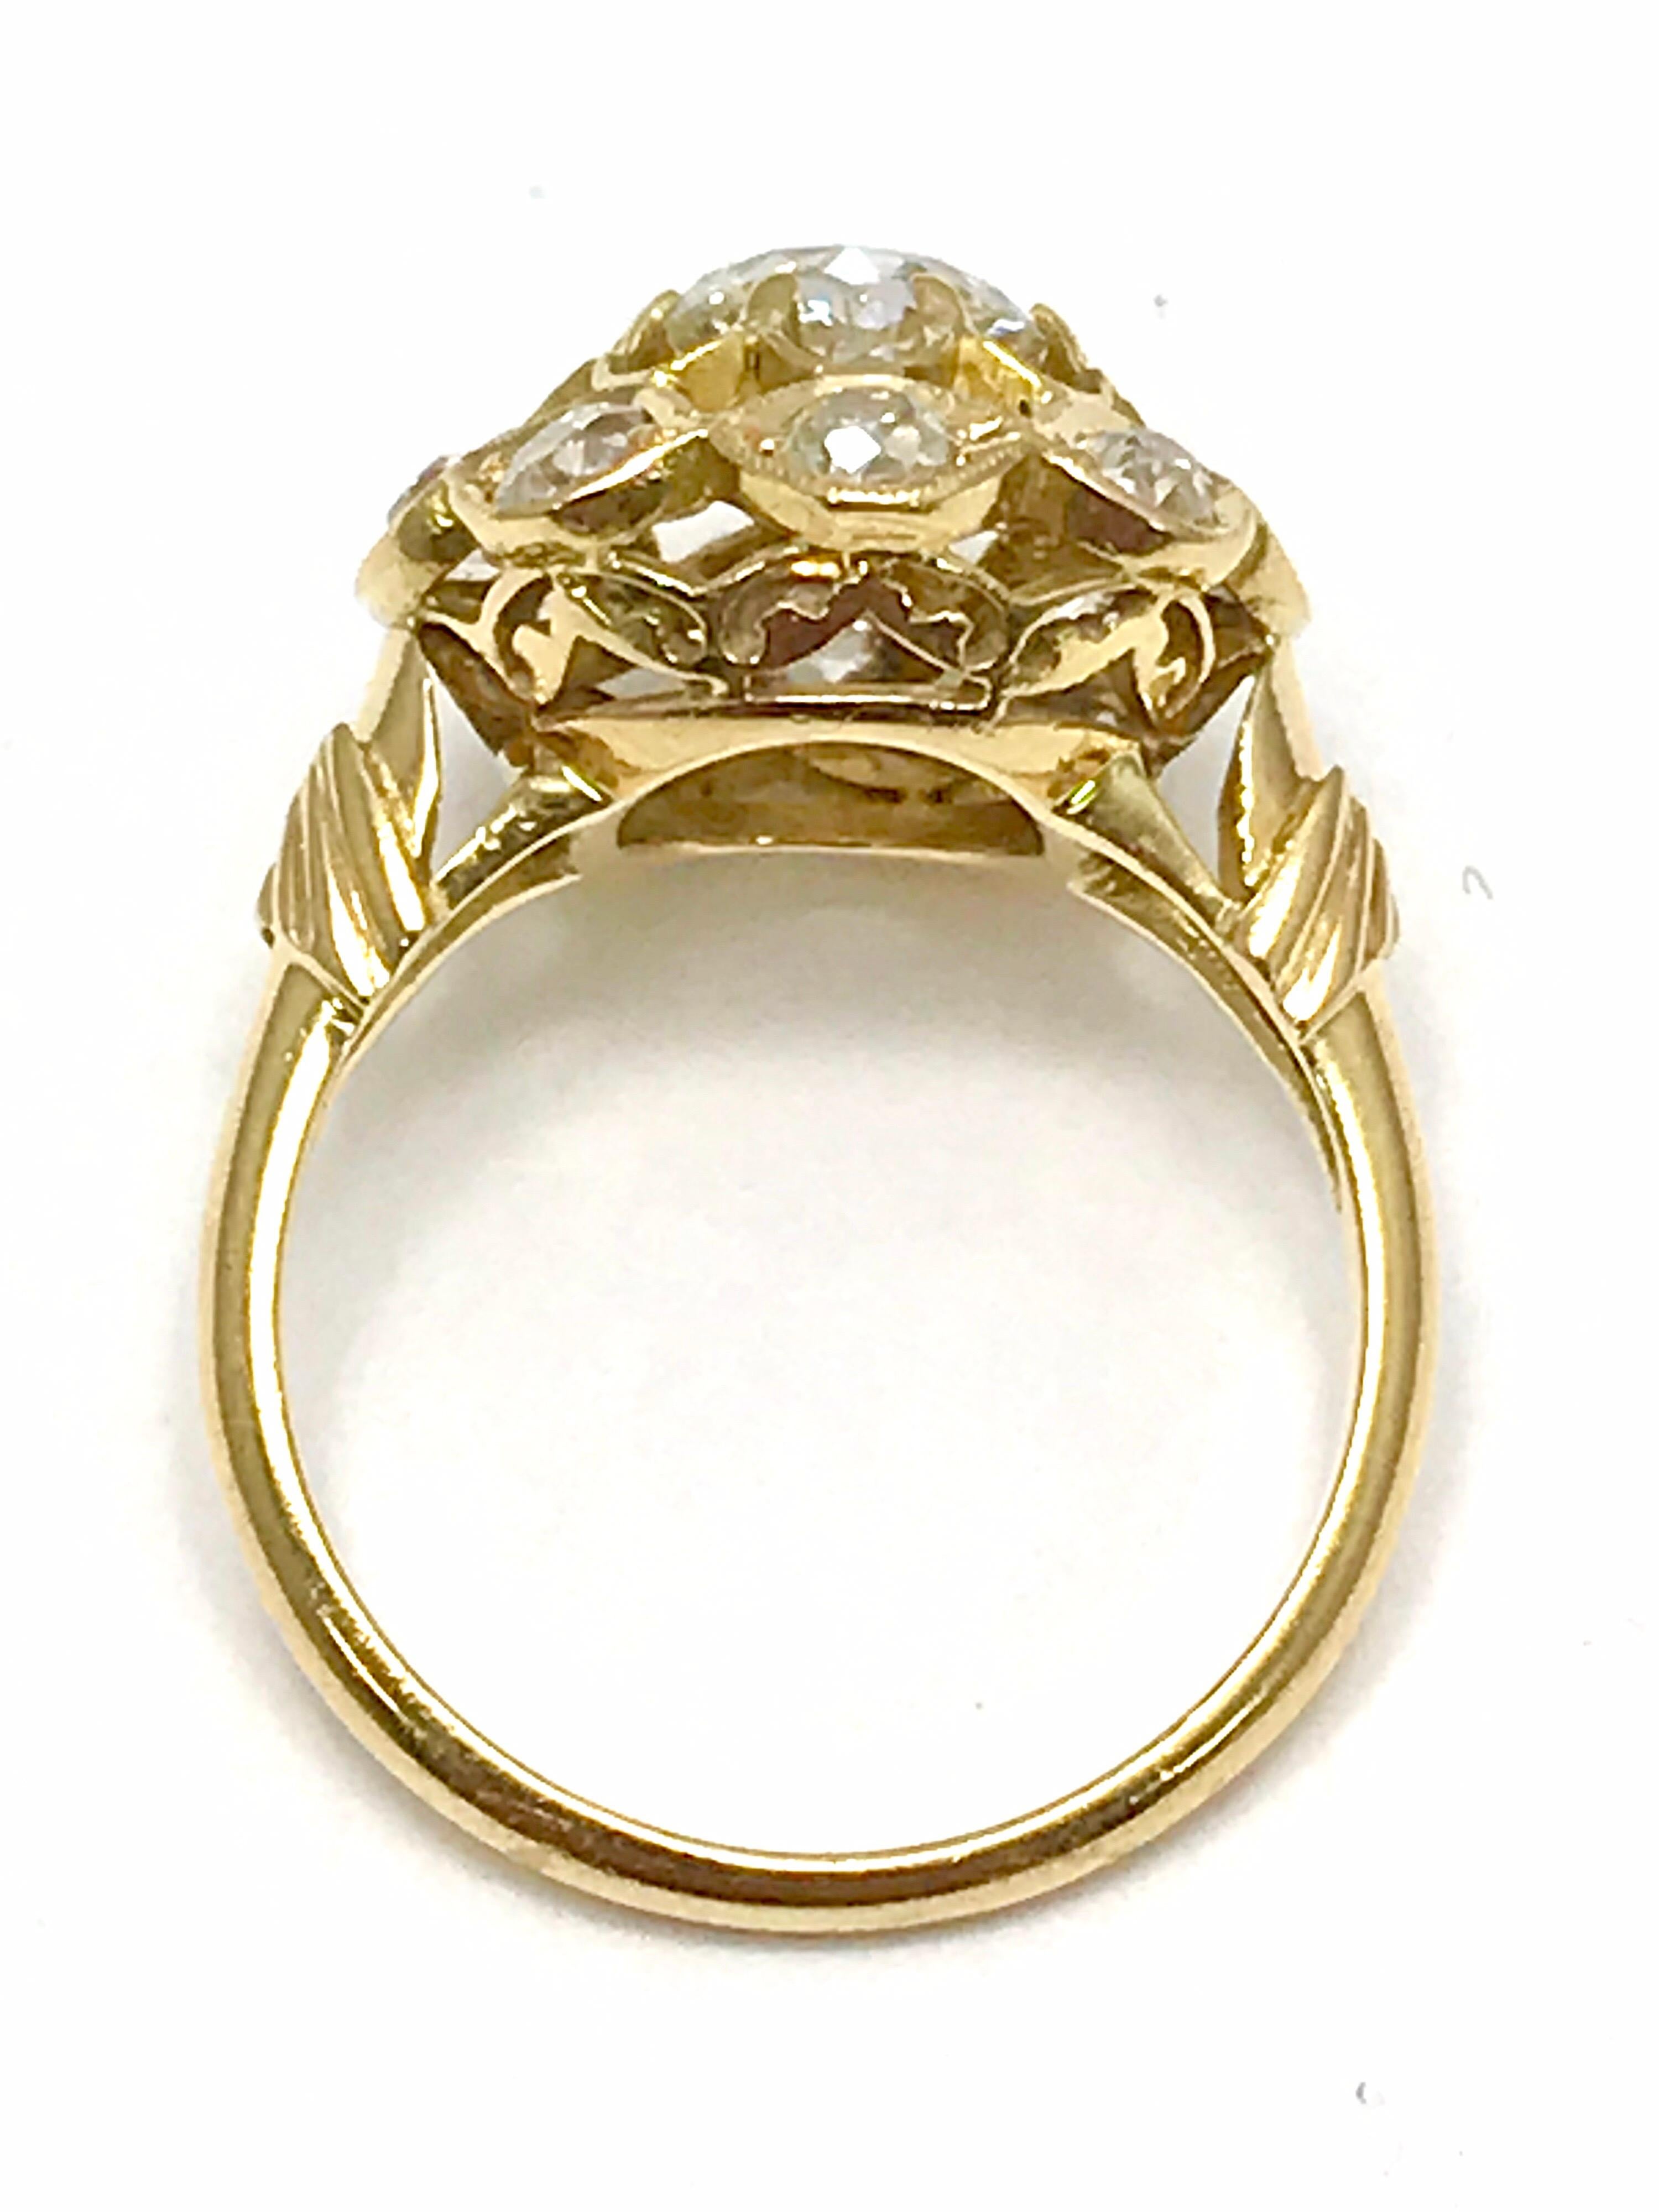 Women's or Men's 1.29 Carat Old Mine Cut Diamond and 18 Karat Gold Engagement or Fashion Ring For Sale